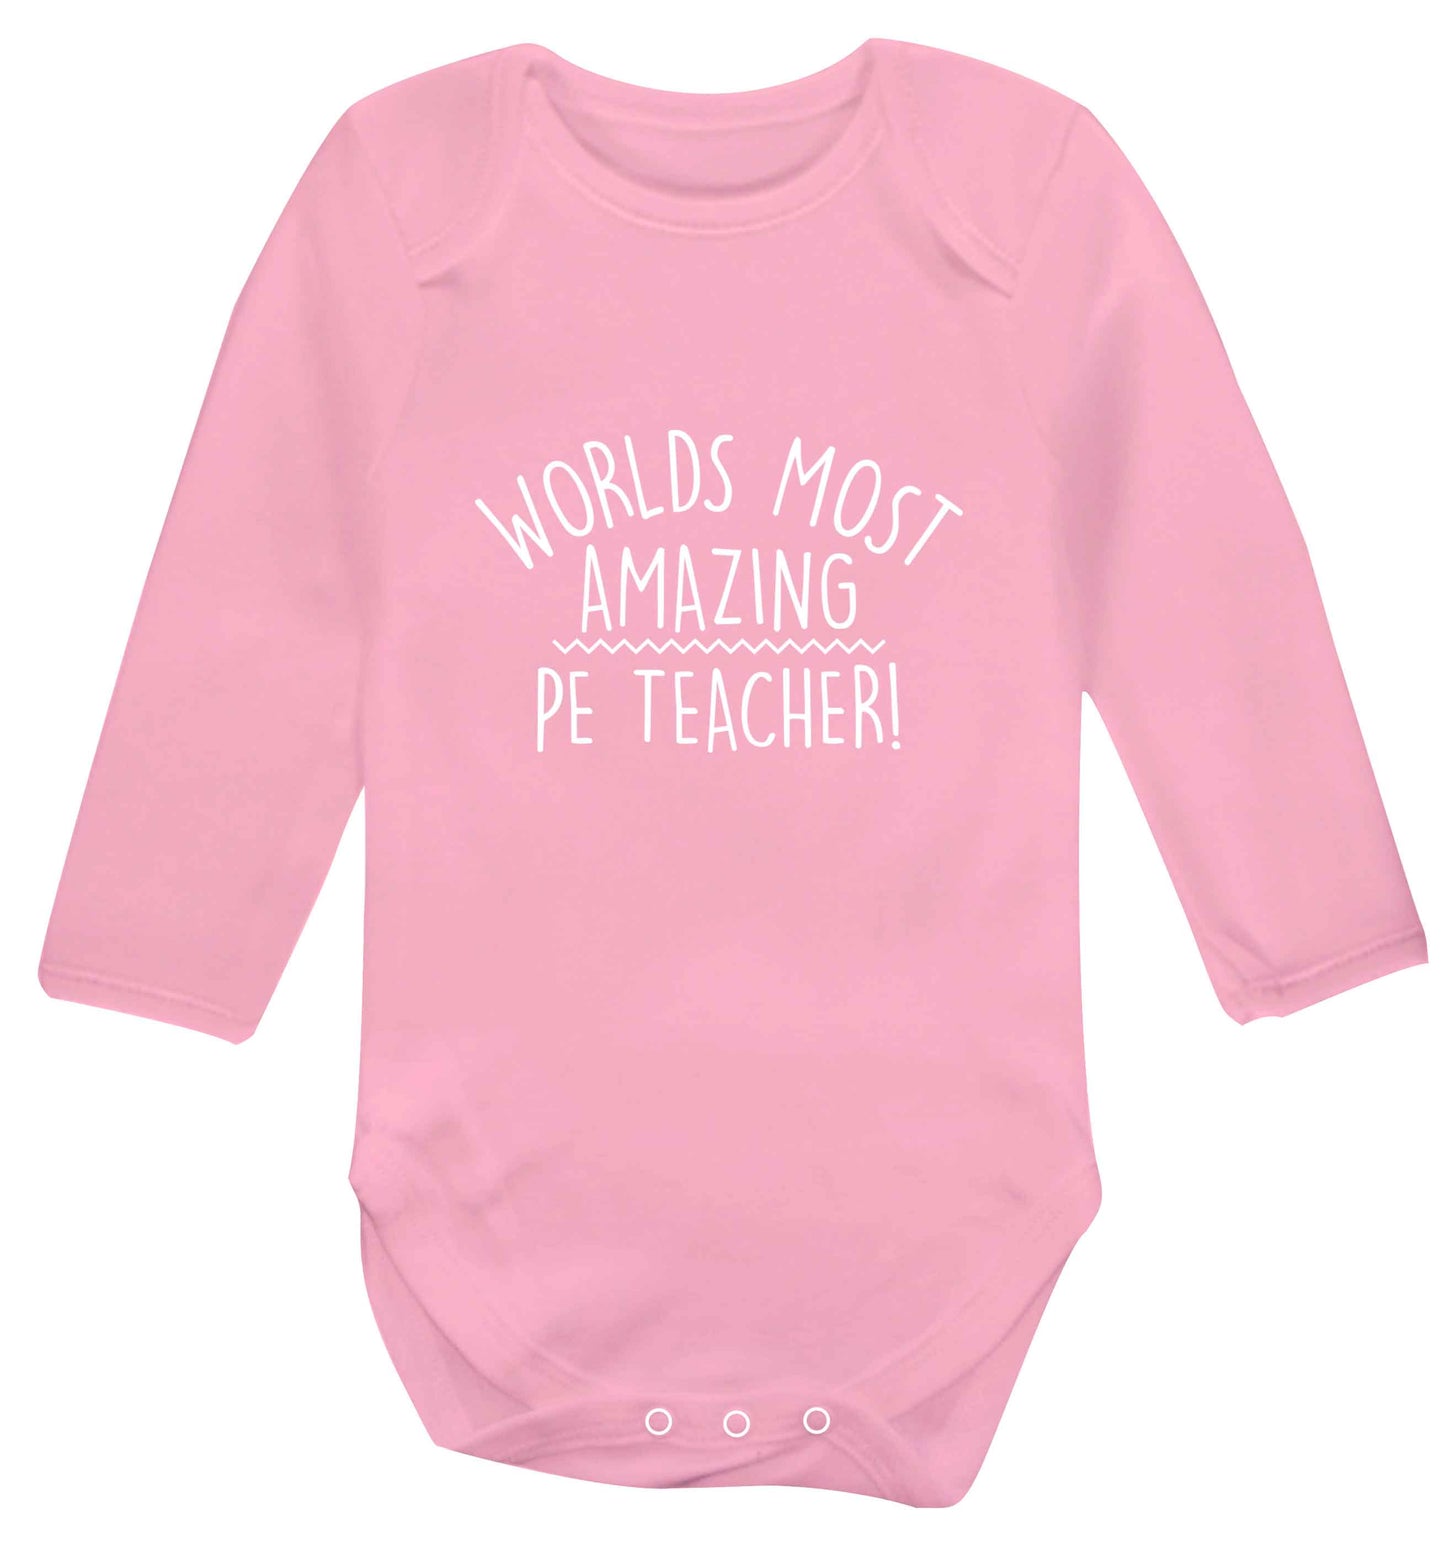 Worlds most amazing PE teacher baby vest long sleeved pale pink 6-12 months